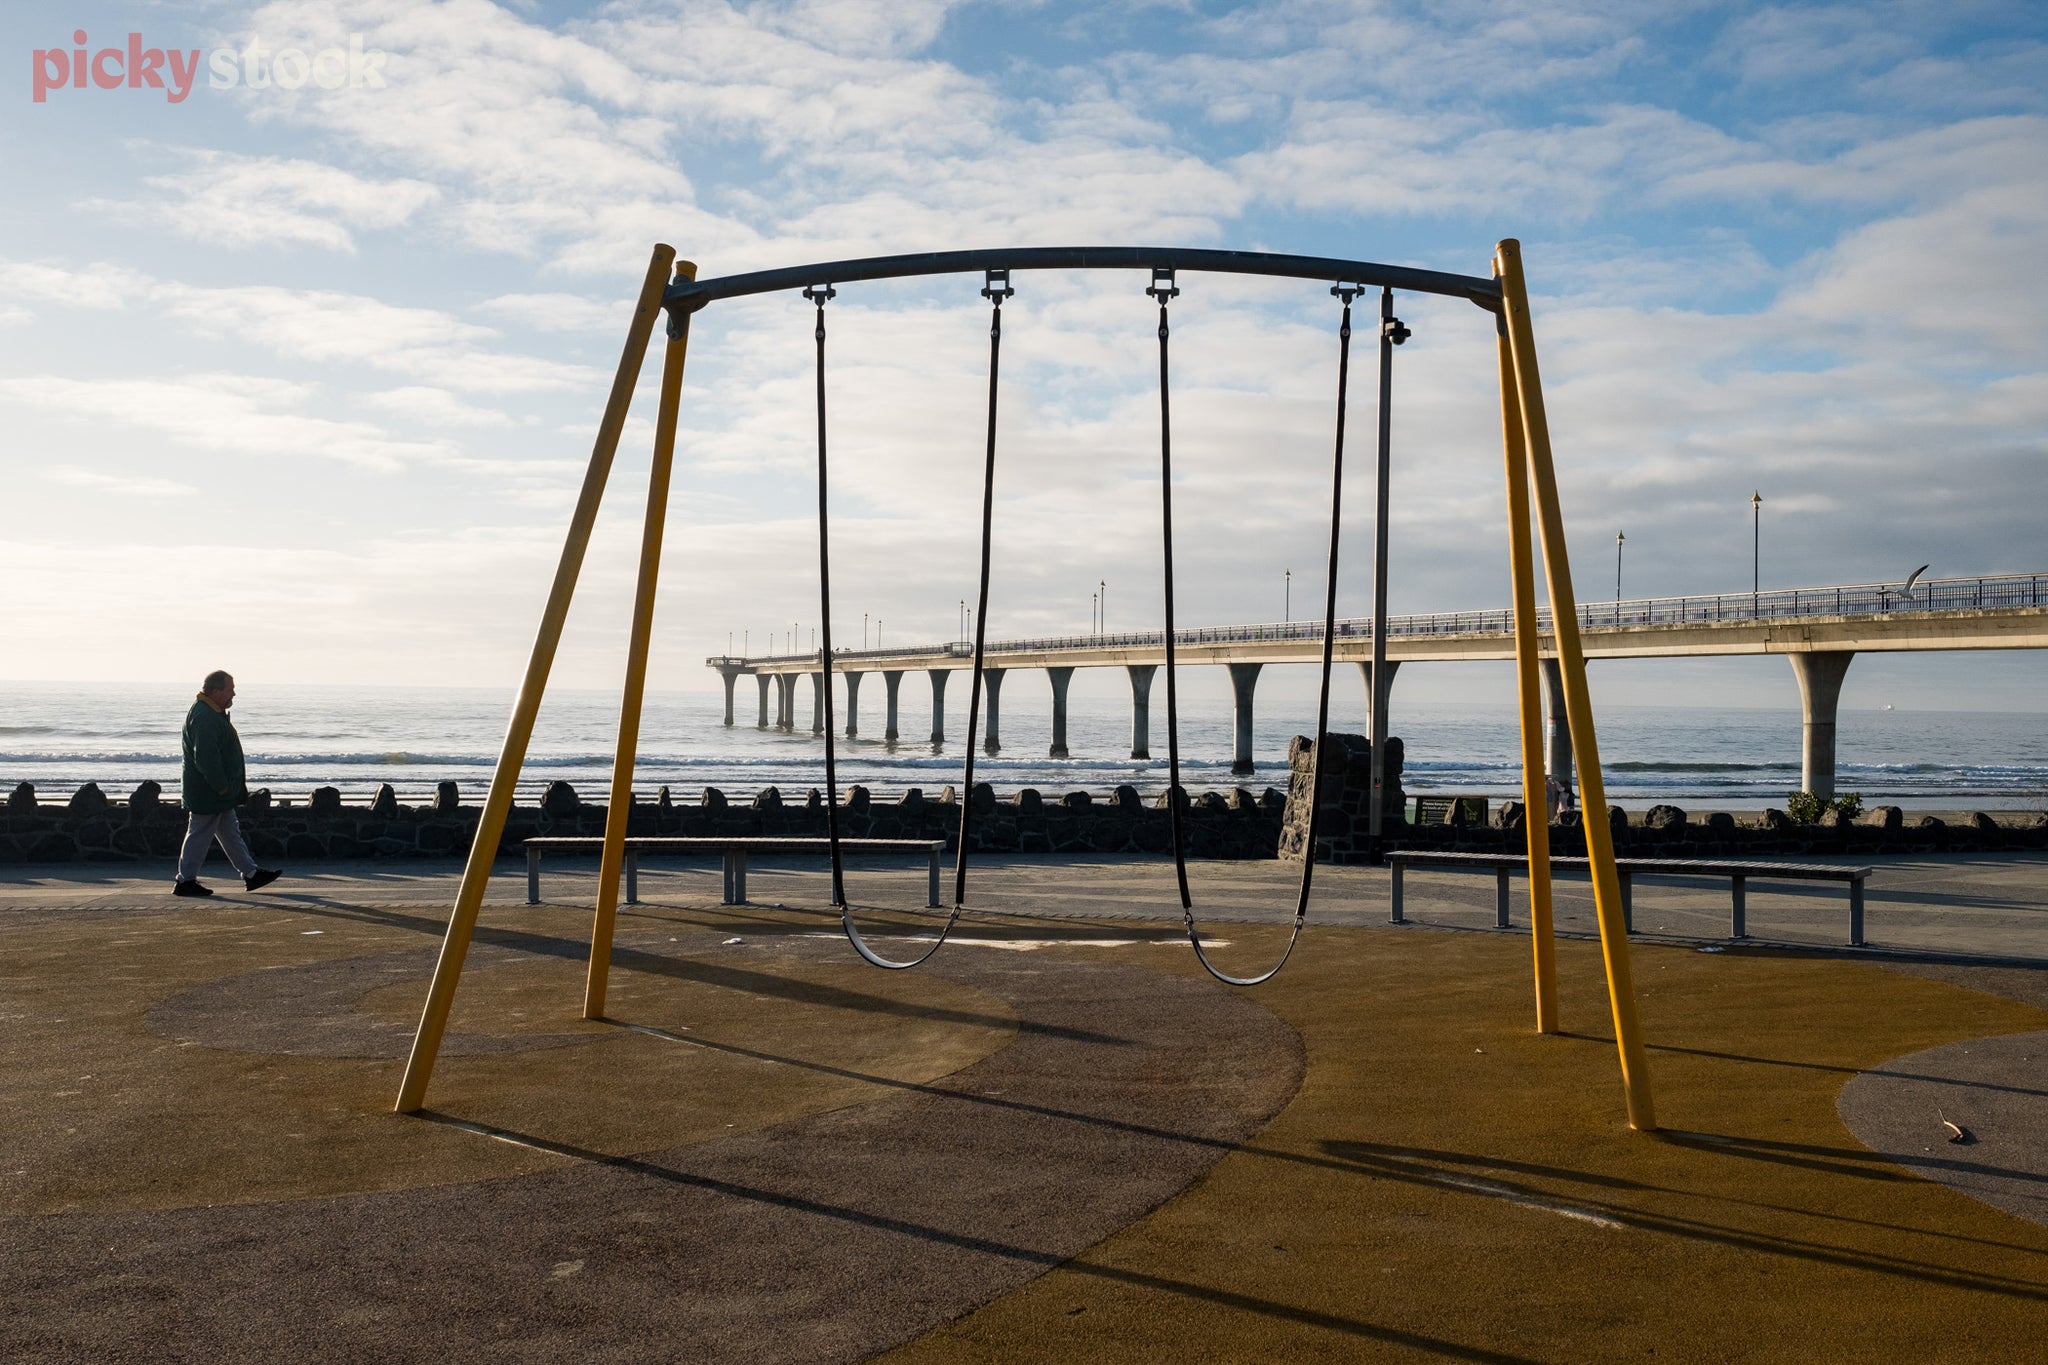 Old yellow double swingset sits empty on the beach front, as an older, unrecognisable gentleman walks past in the background. 